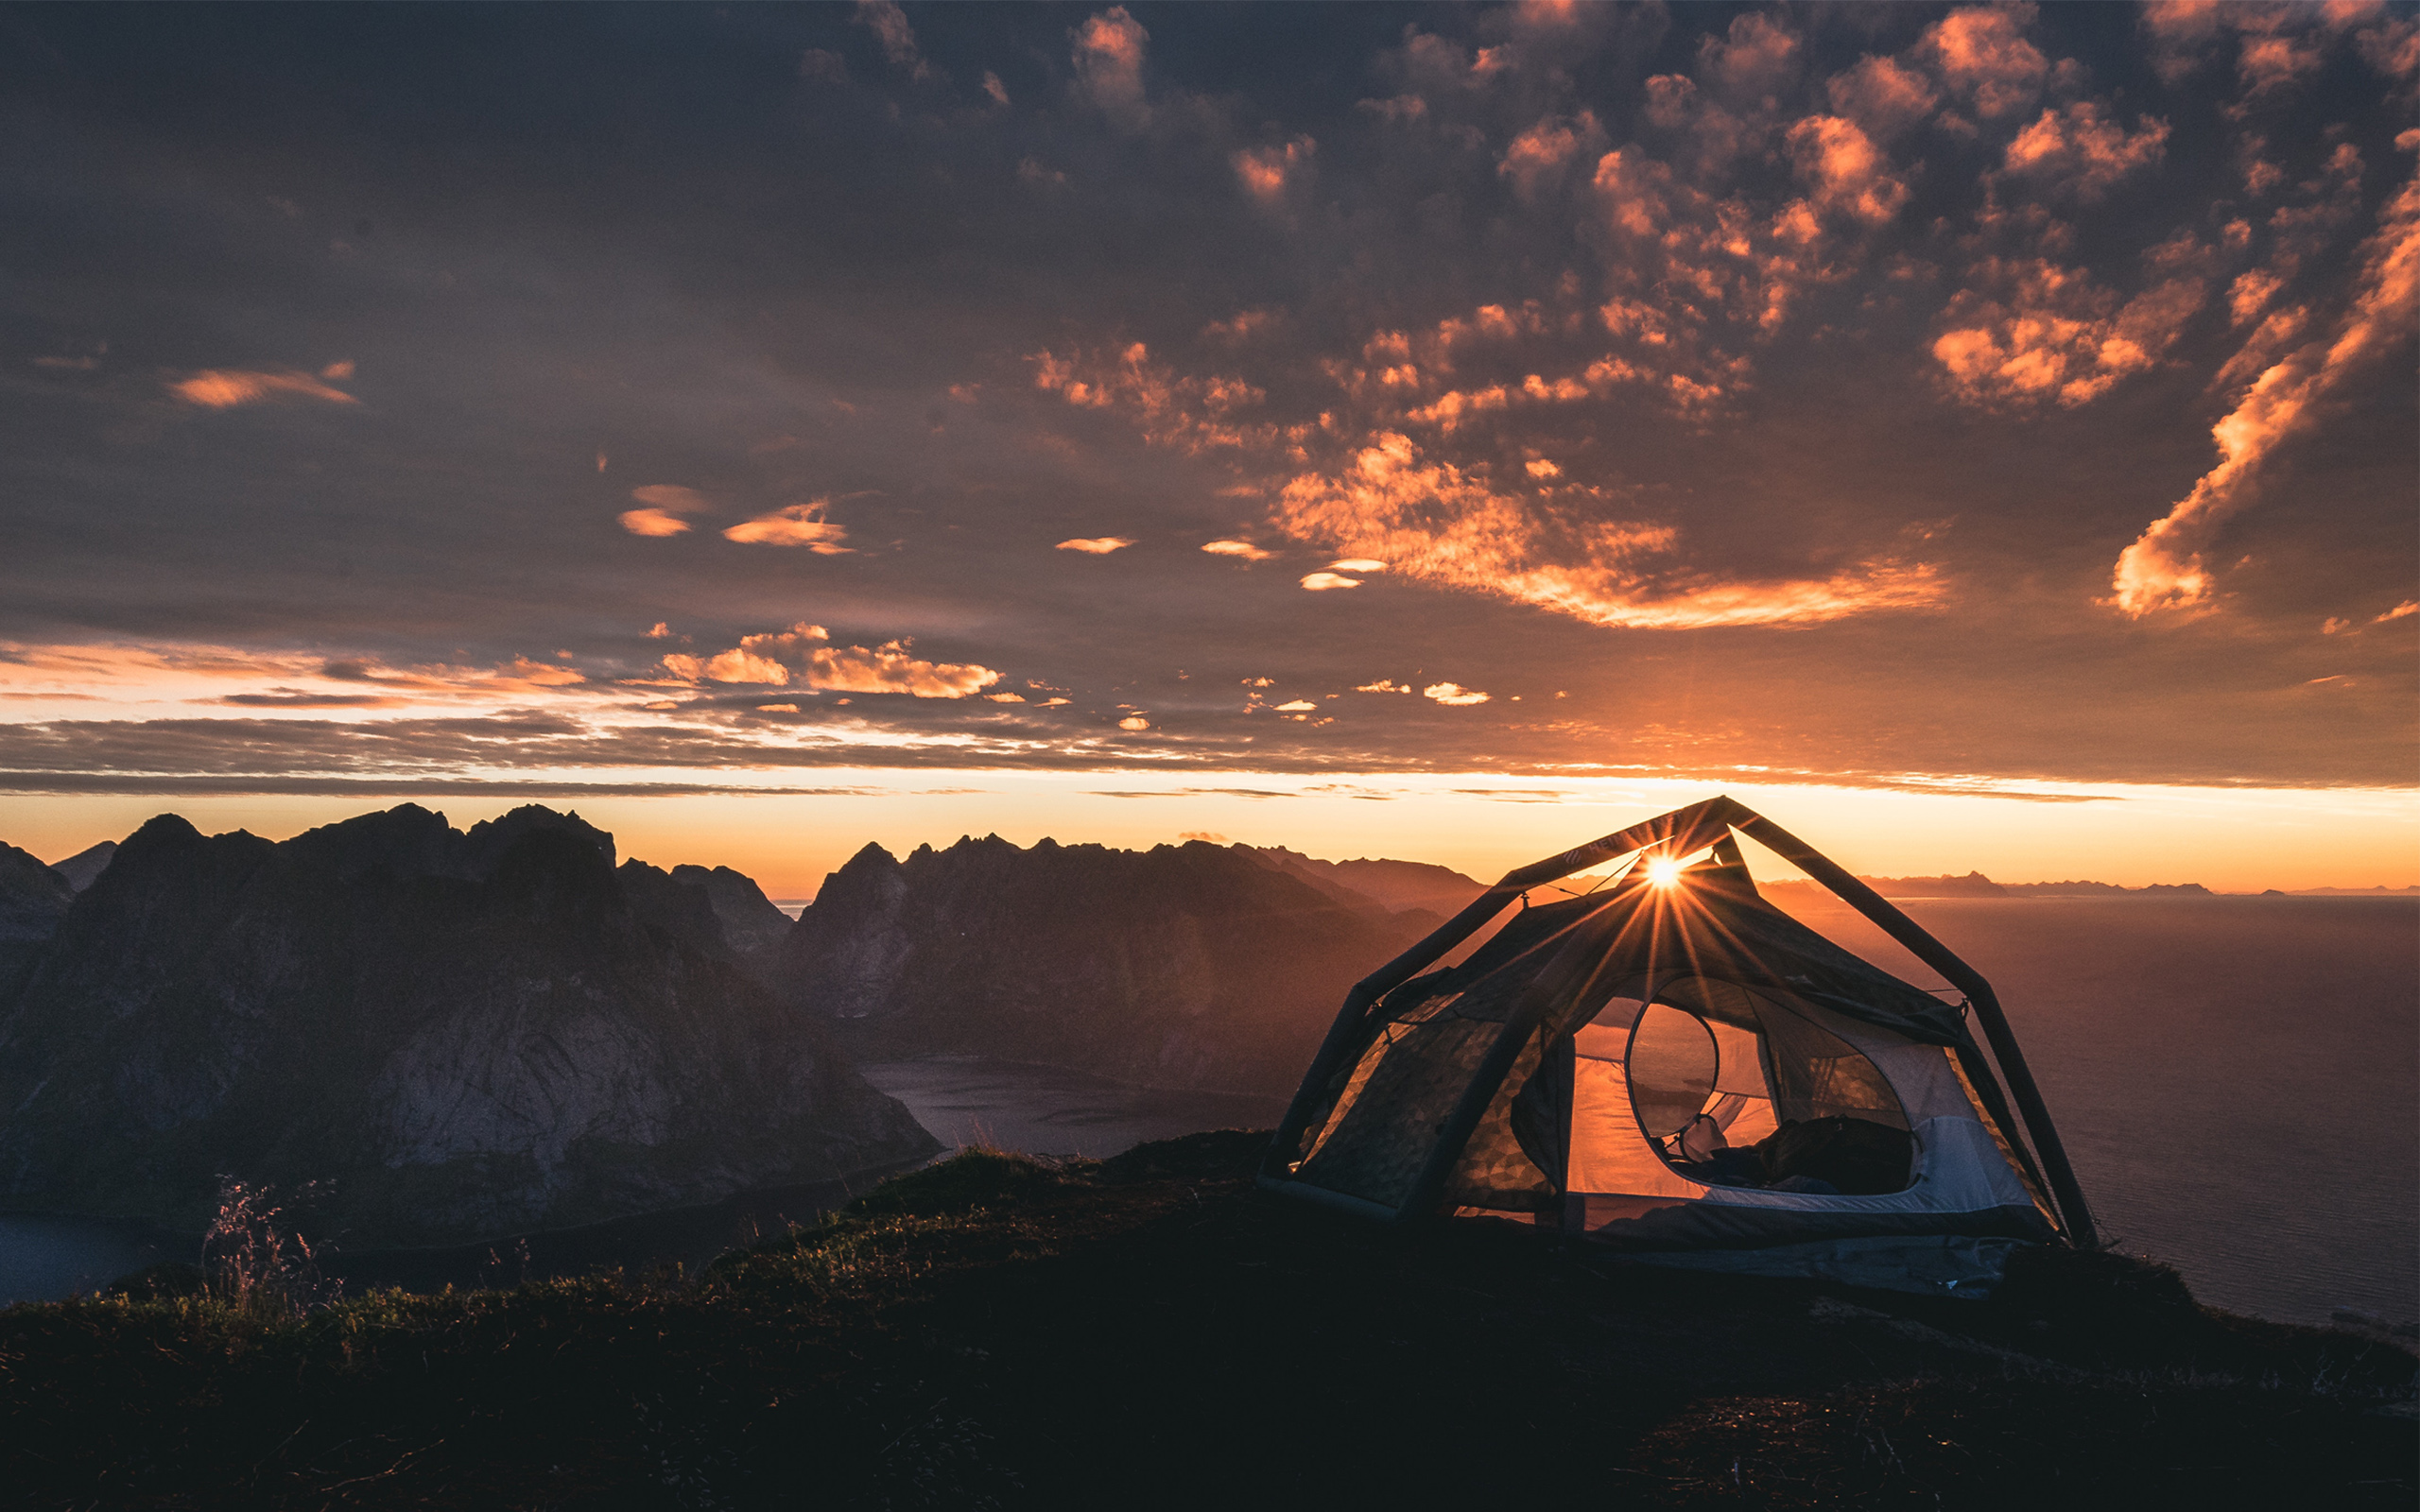 General 2560x1600 tent camping mountains landscape sunset photography sun rays